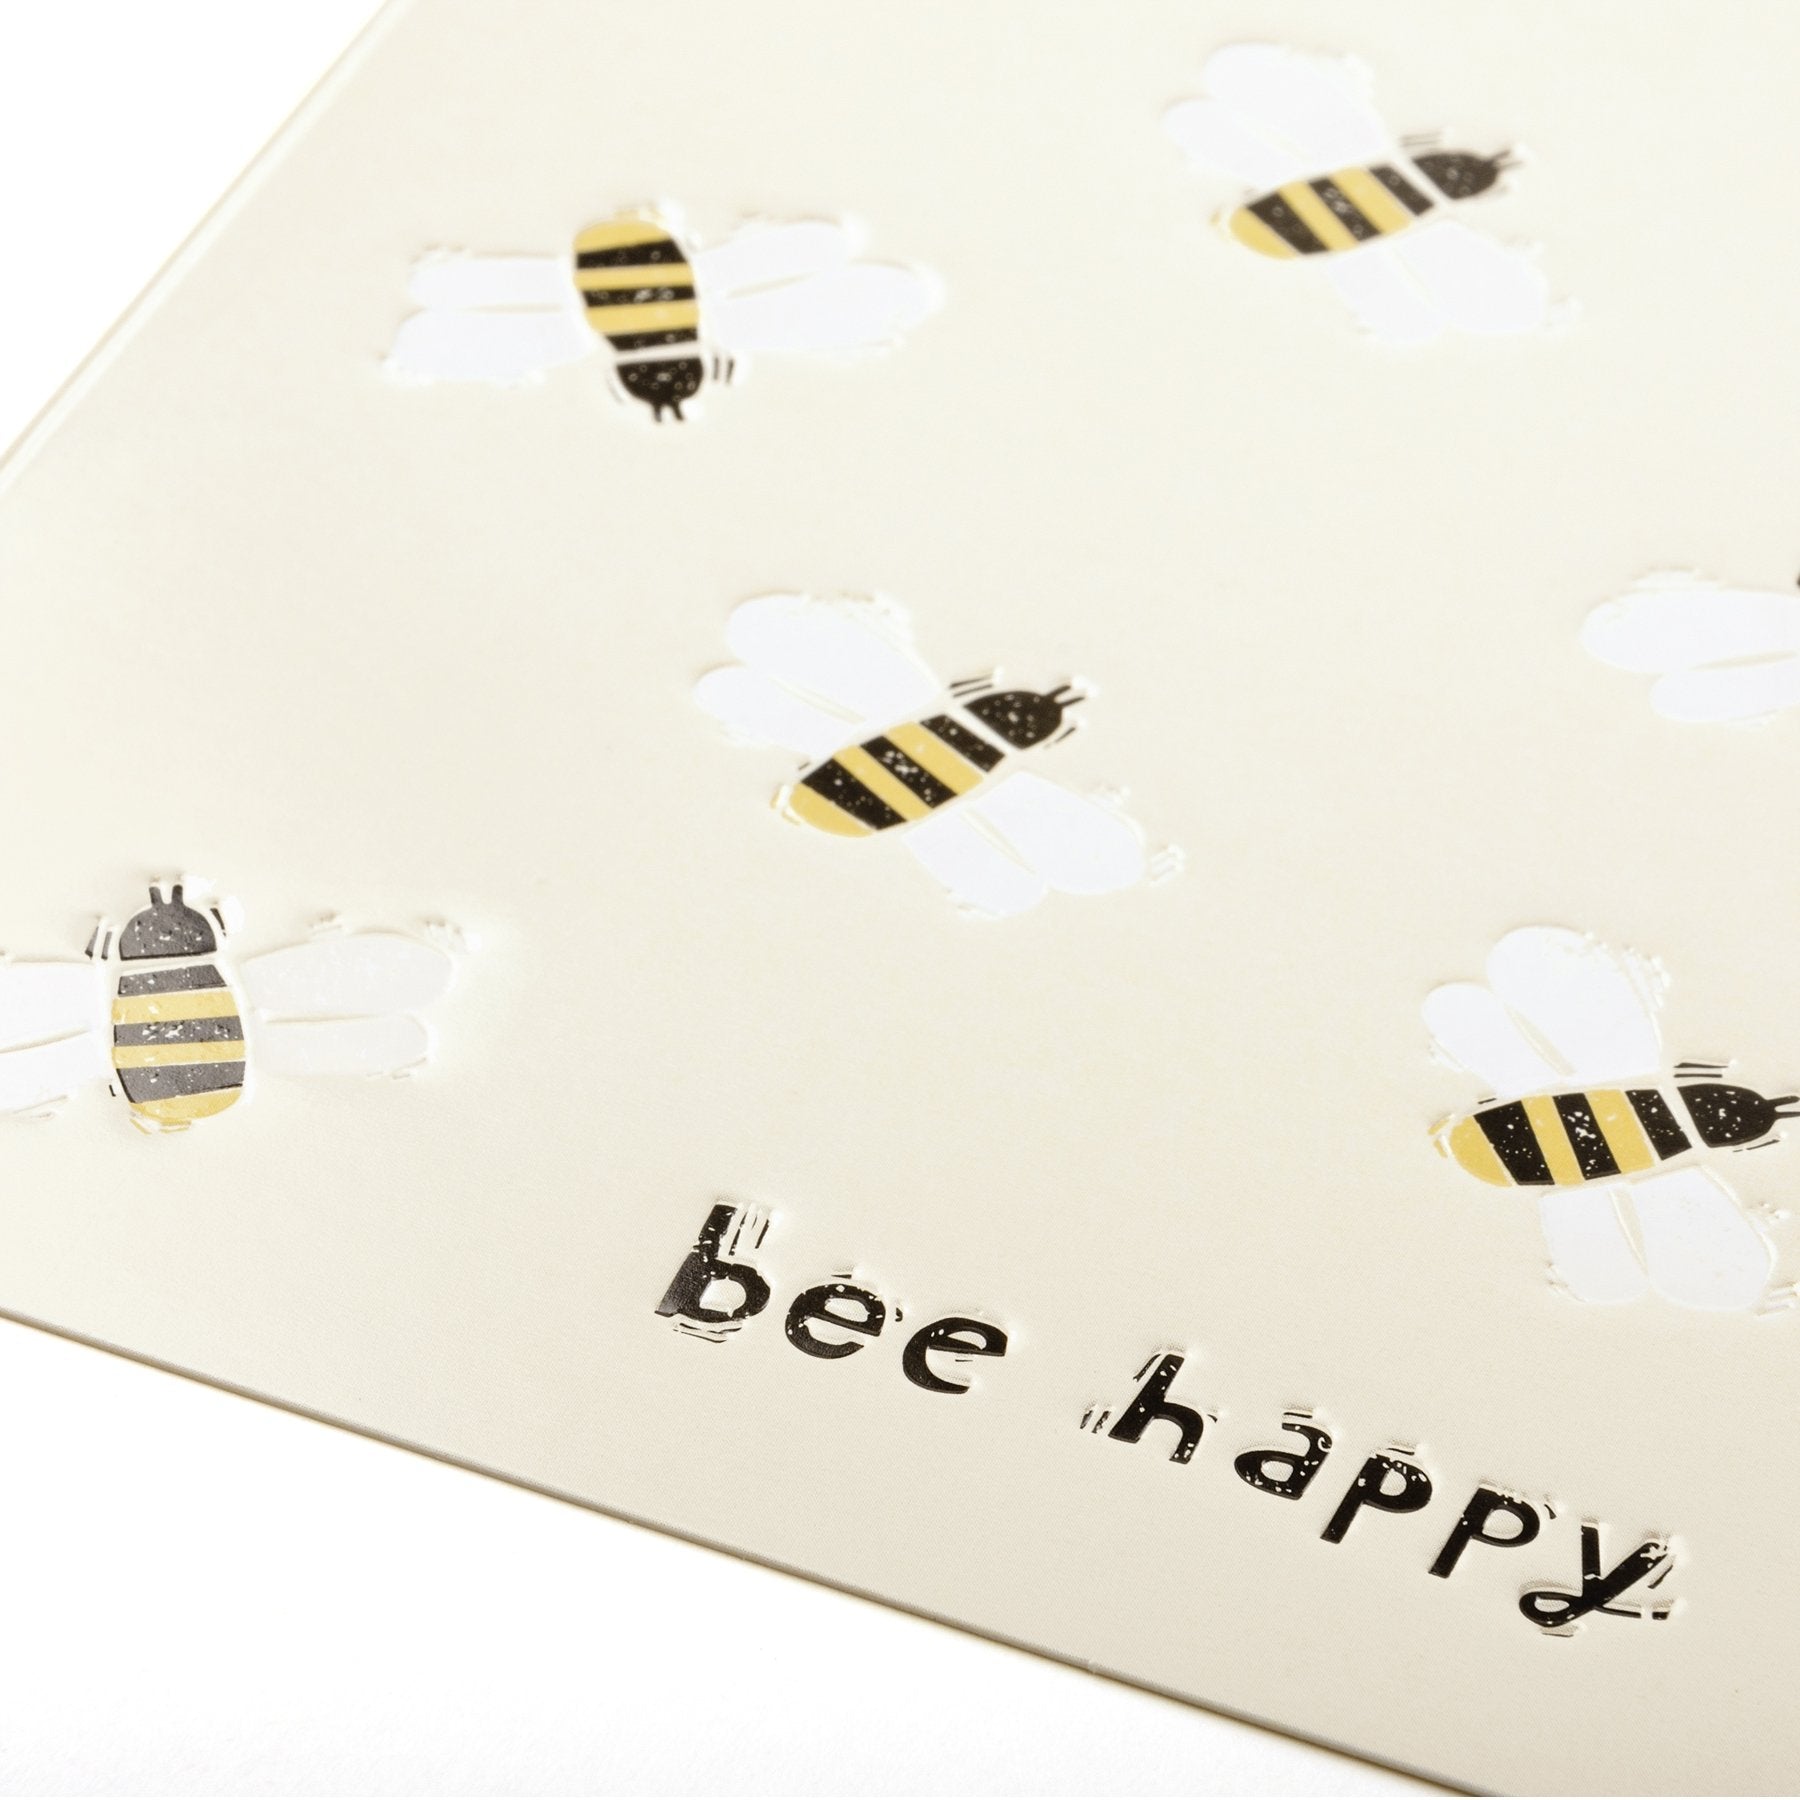 Bee Happy Note Card Set | 8 Cards